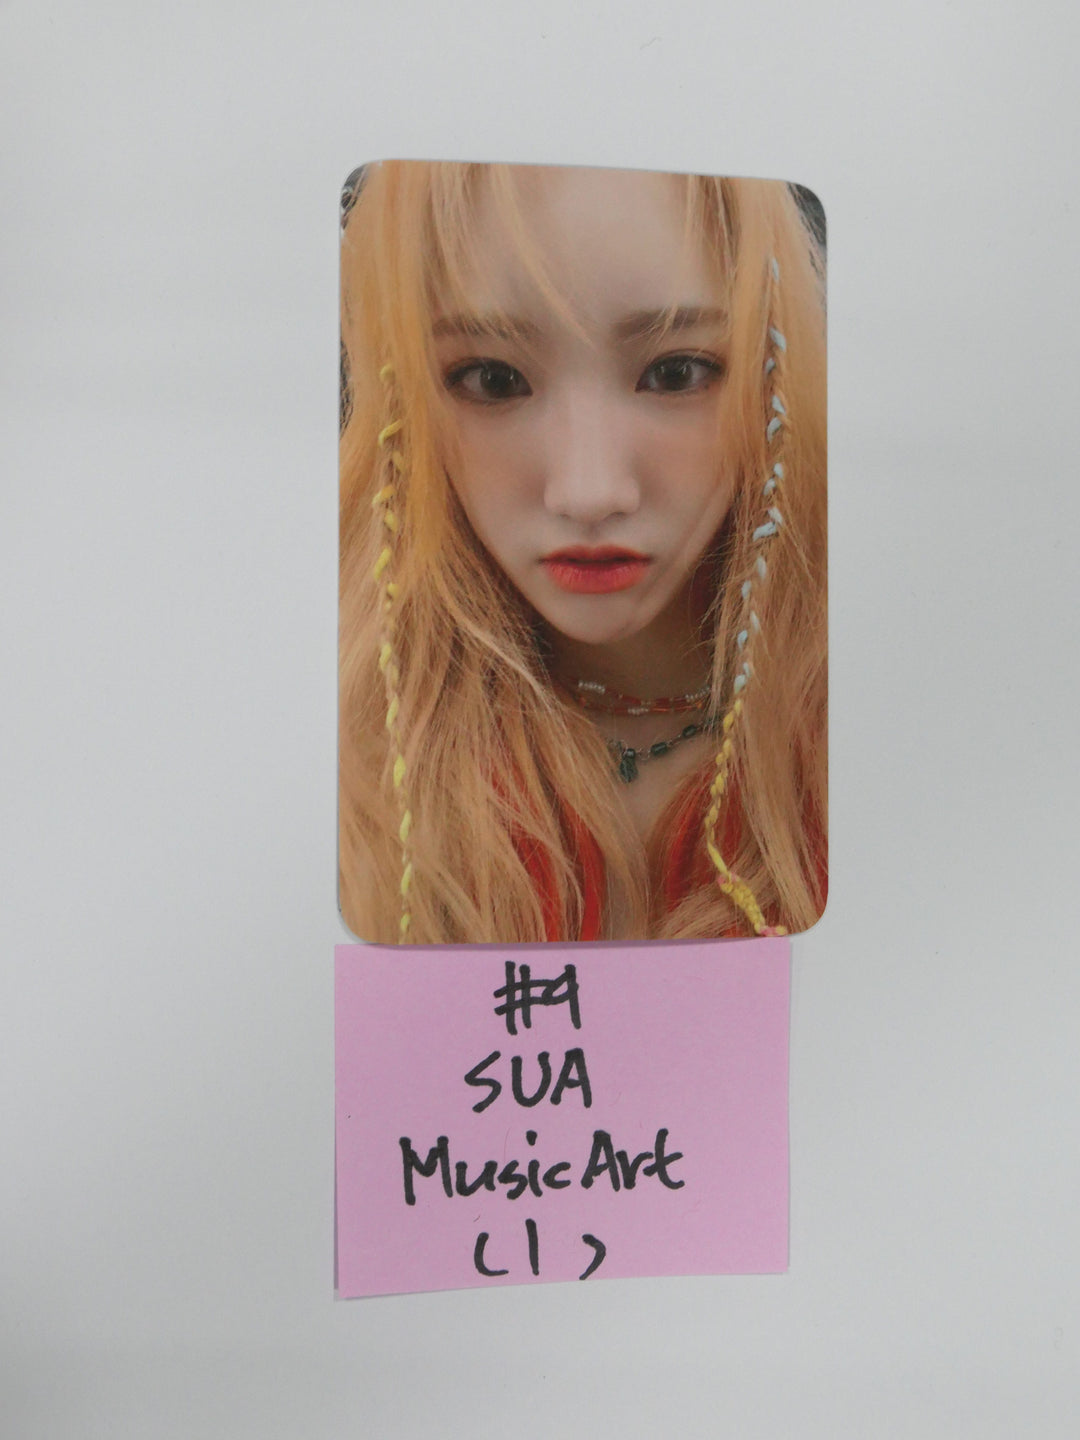 Pixy 'Bravery' - Musicart Fansign Event Photocard